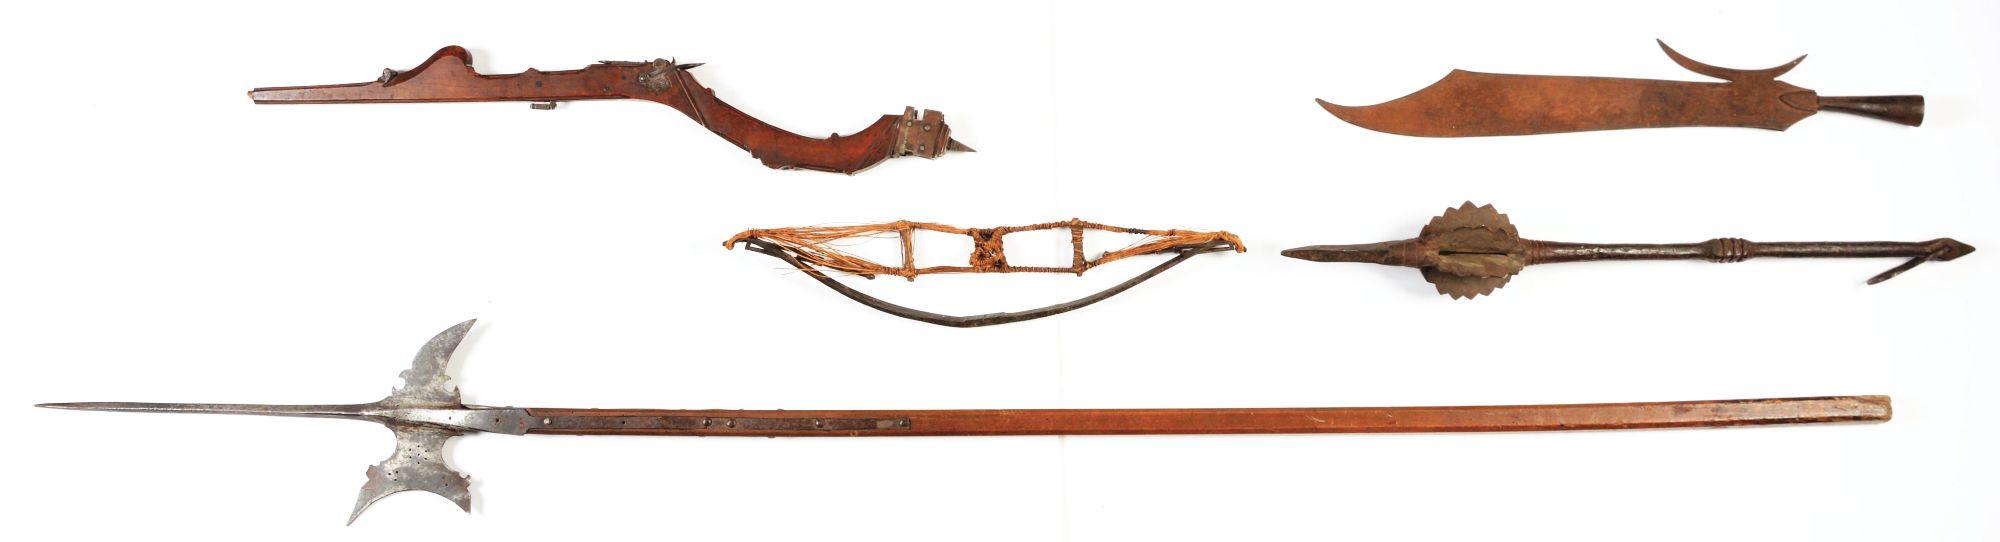 Lot of 4: European Weapons Including A 17th Century Halberd on Shaft, A 17th Century Partially Compl